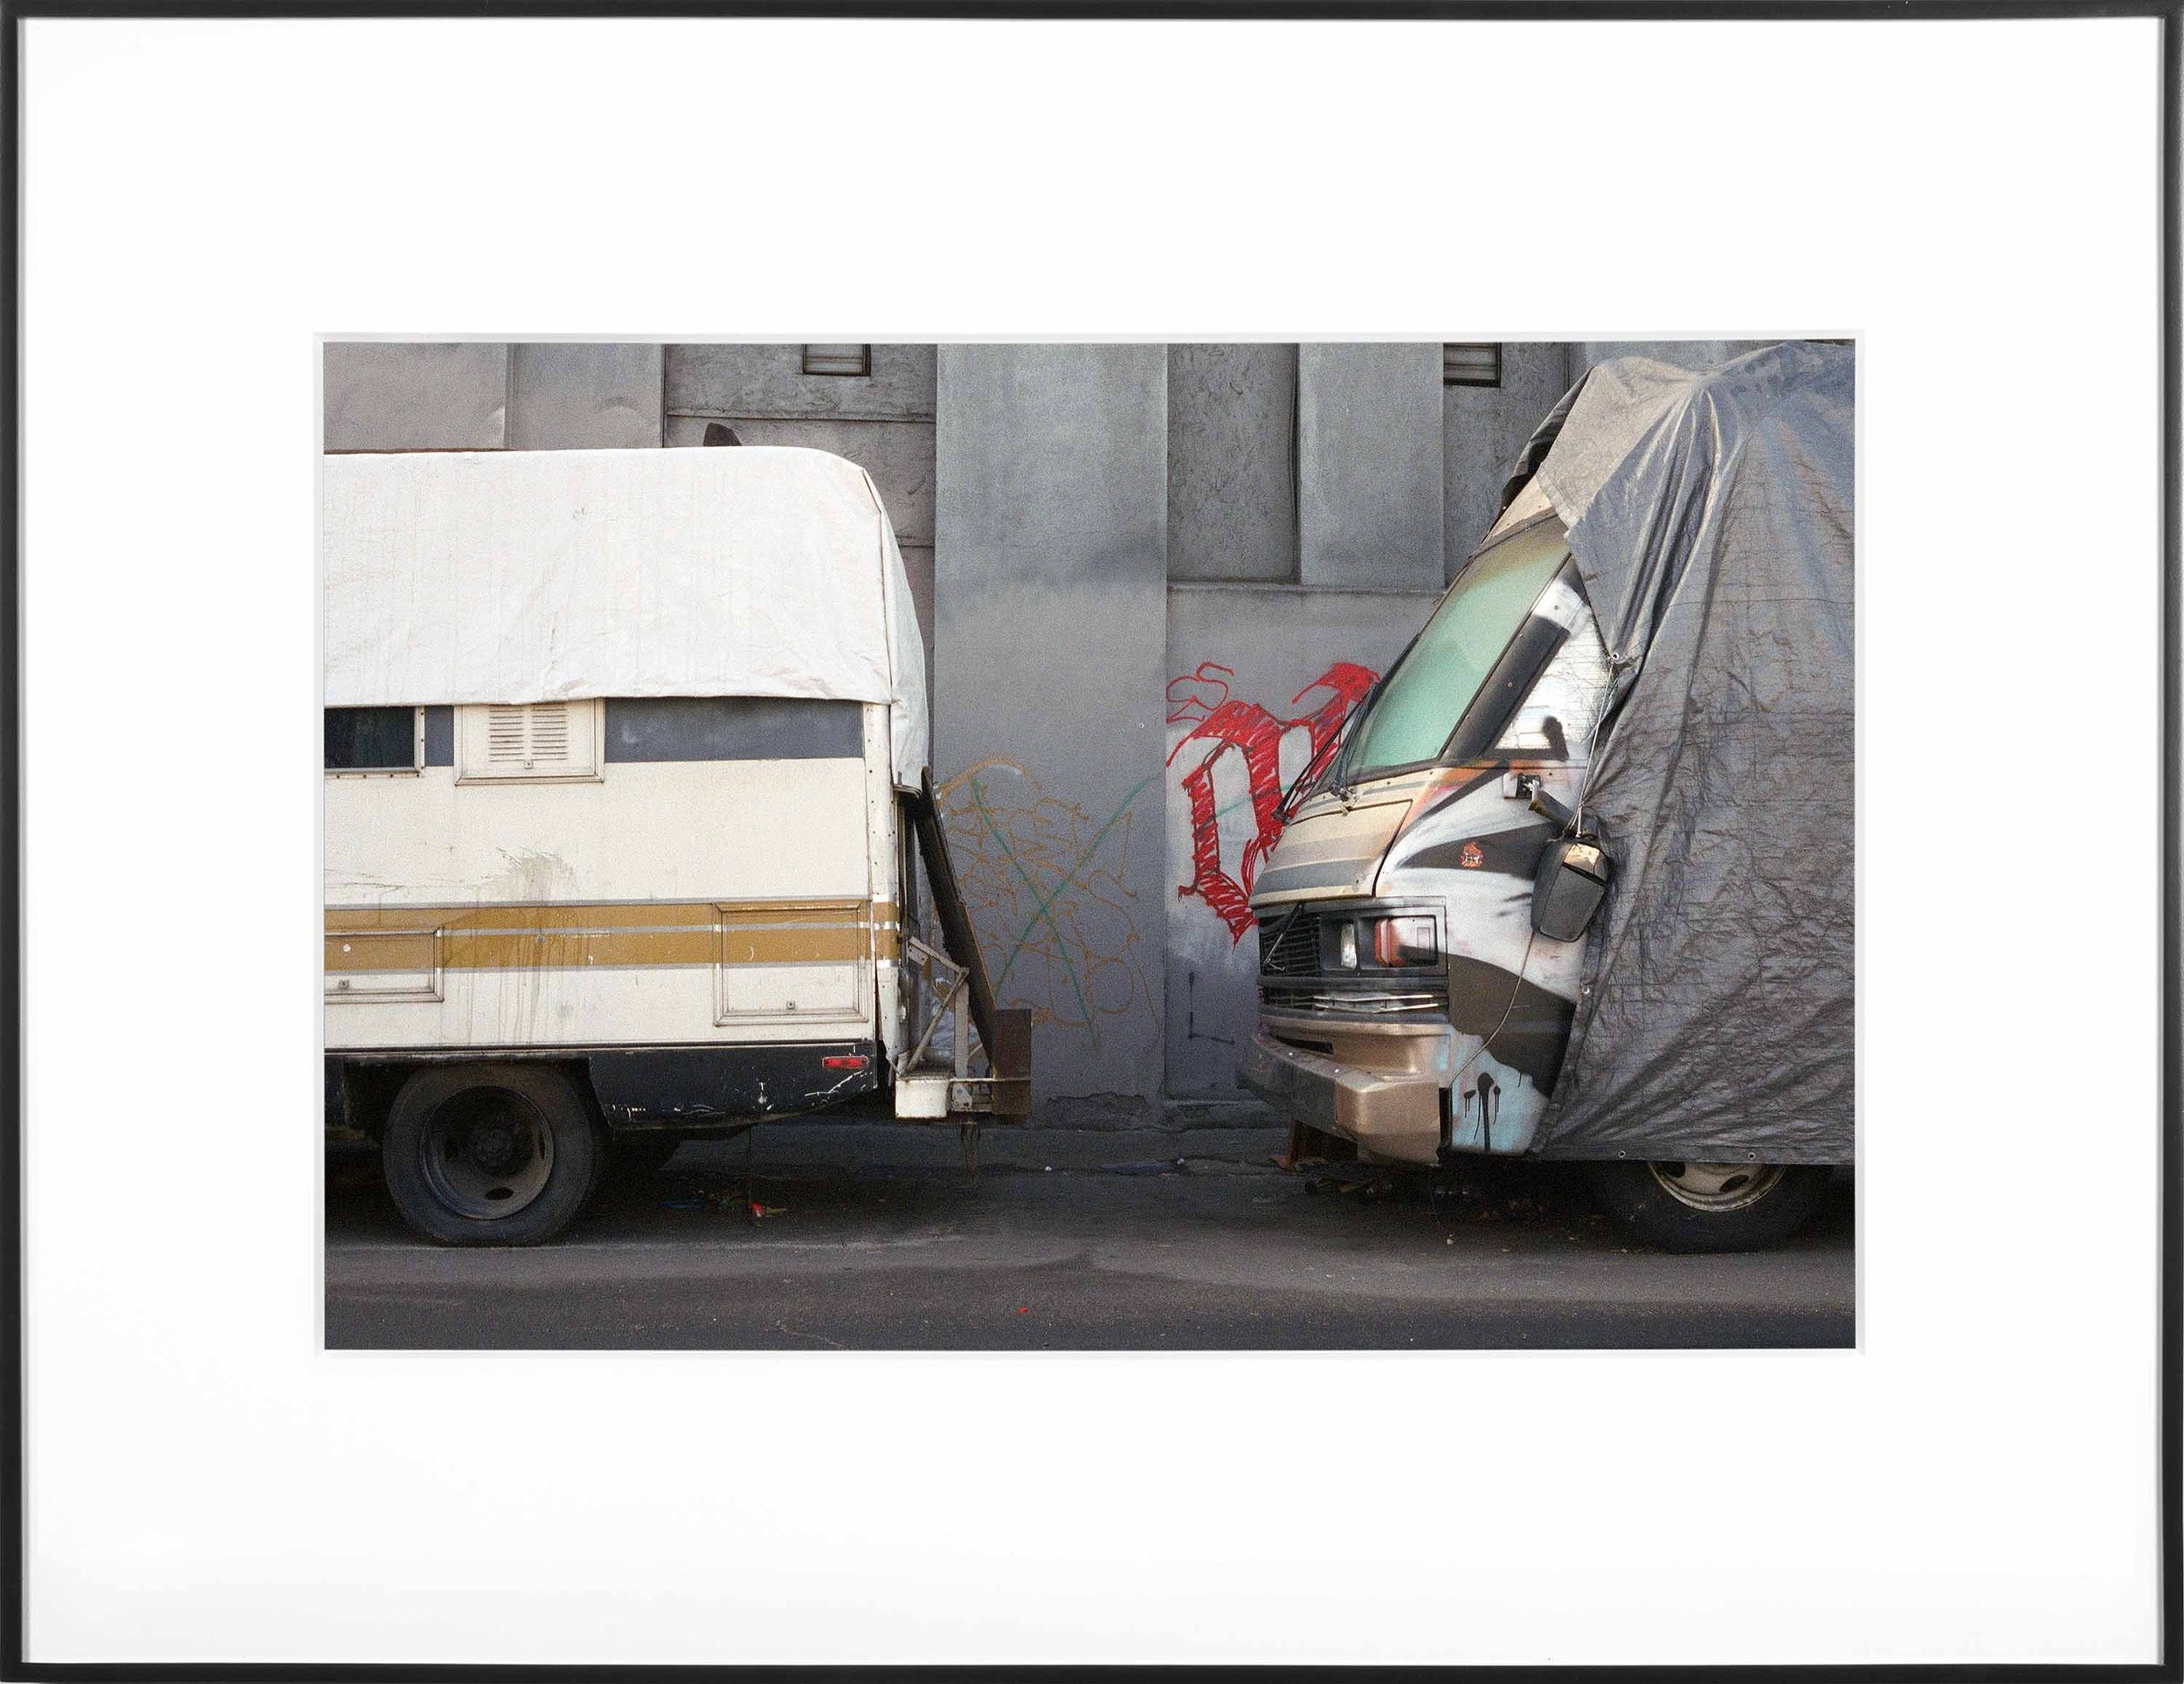   (Temporary) Homes for America: 3300 block to 4400 block, Union Pacific Avenue, between South Grande Vista Avenue and South Marianna Avenue, Los Angeles/Commerce, California, December 2020    2021   Chromogenic print  9 1/2 x 13 inches (24 x 33 cm) 